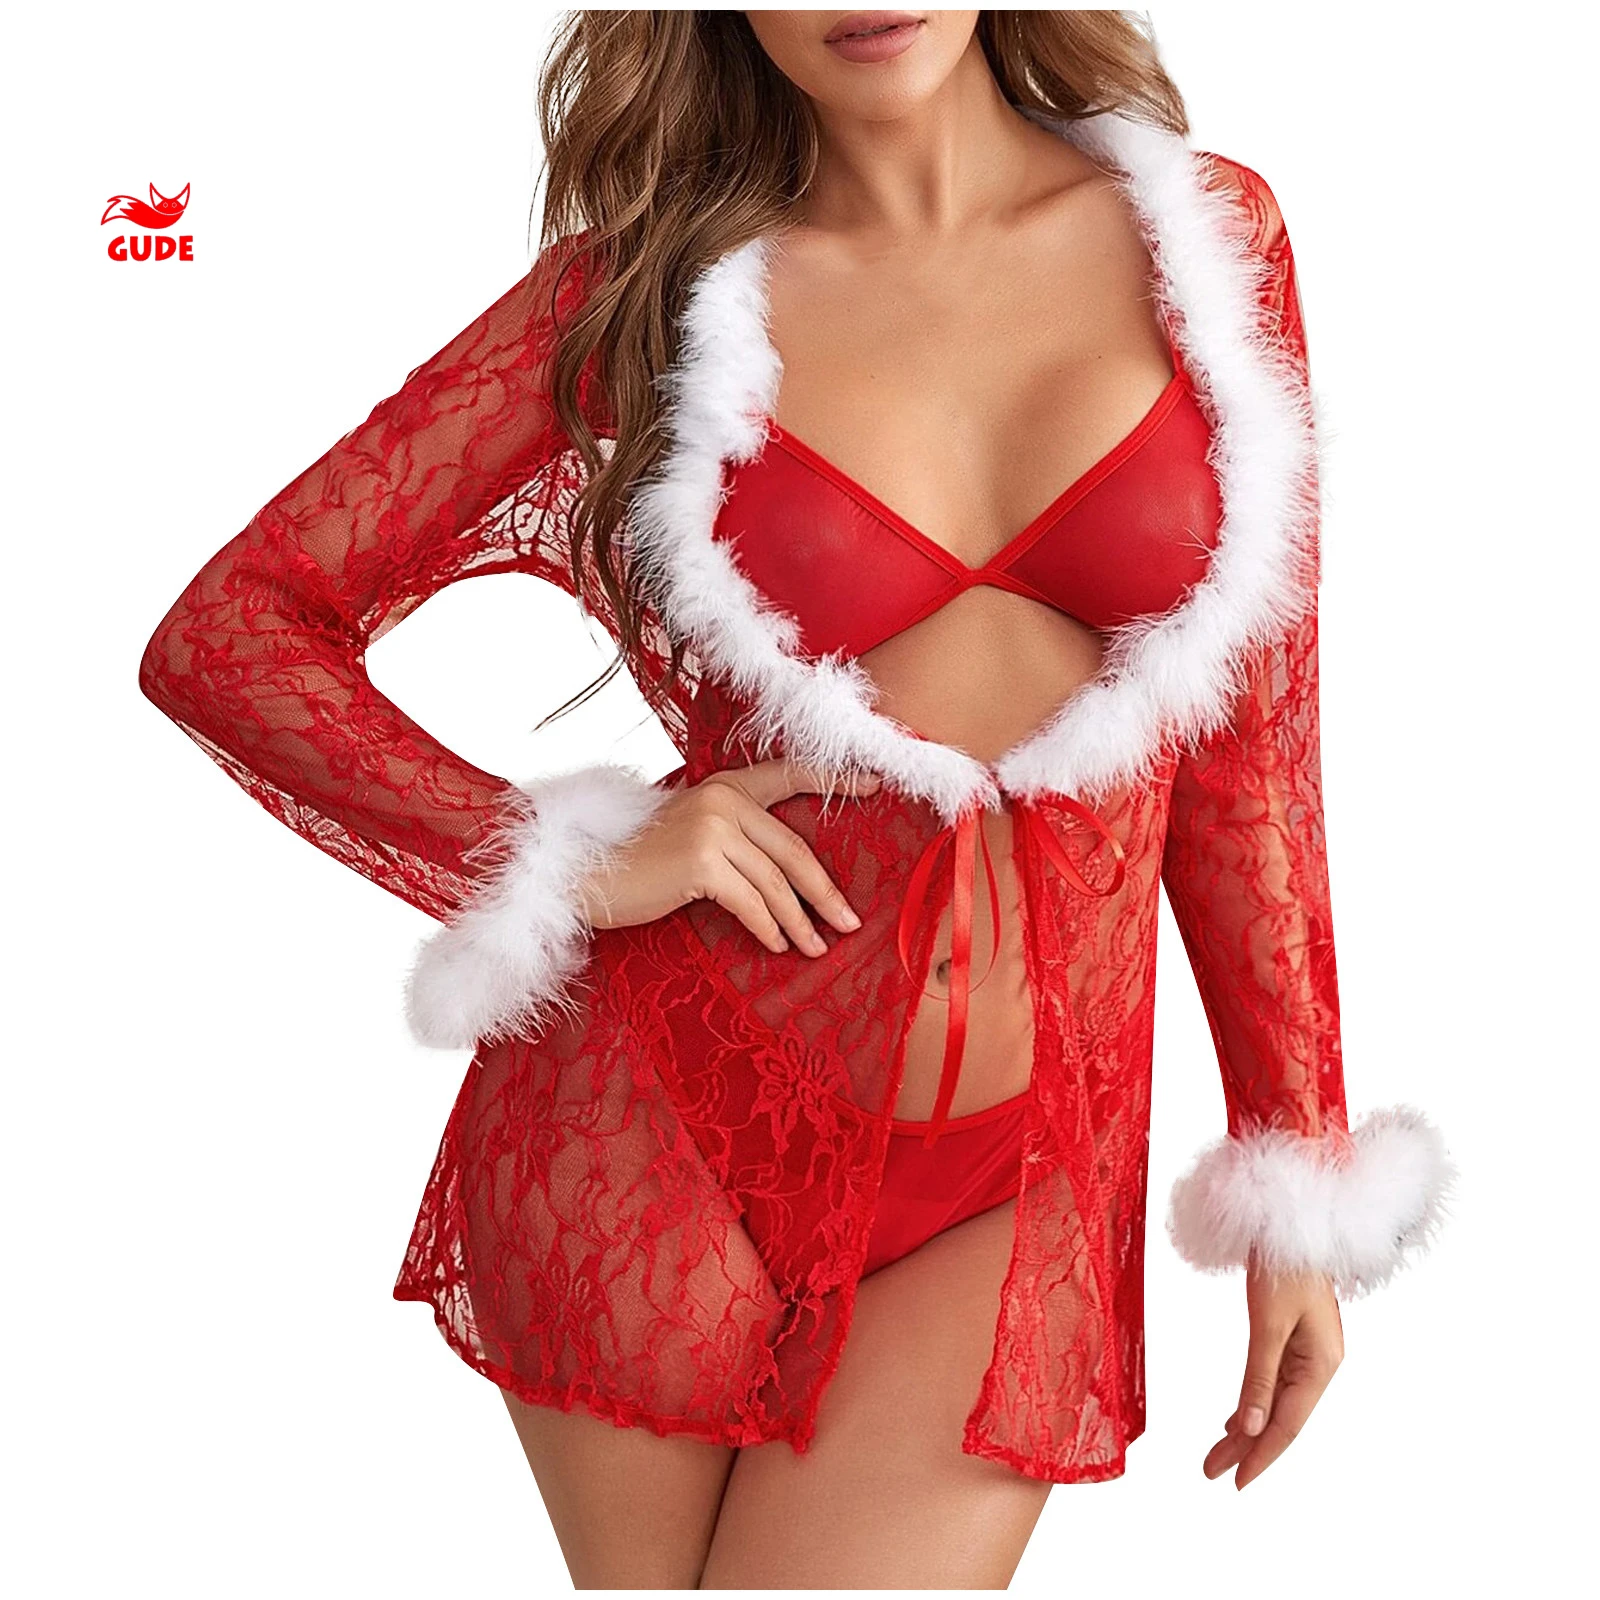 Source Hot Women Christmas Gift For Wife Husband Red Lingerie Underwear Dress Santa Claus Cosplay Costume Sexy Mini Dress Sleepwear on m.alibaba photo